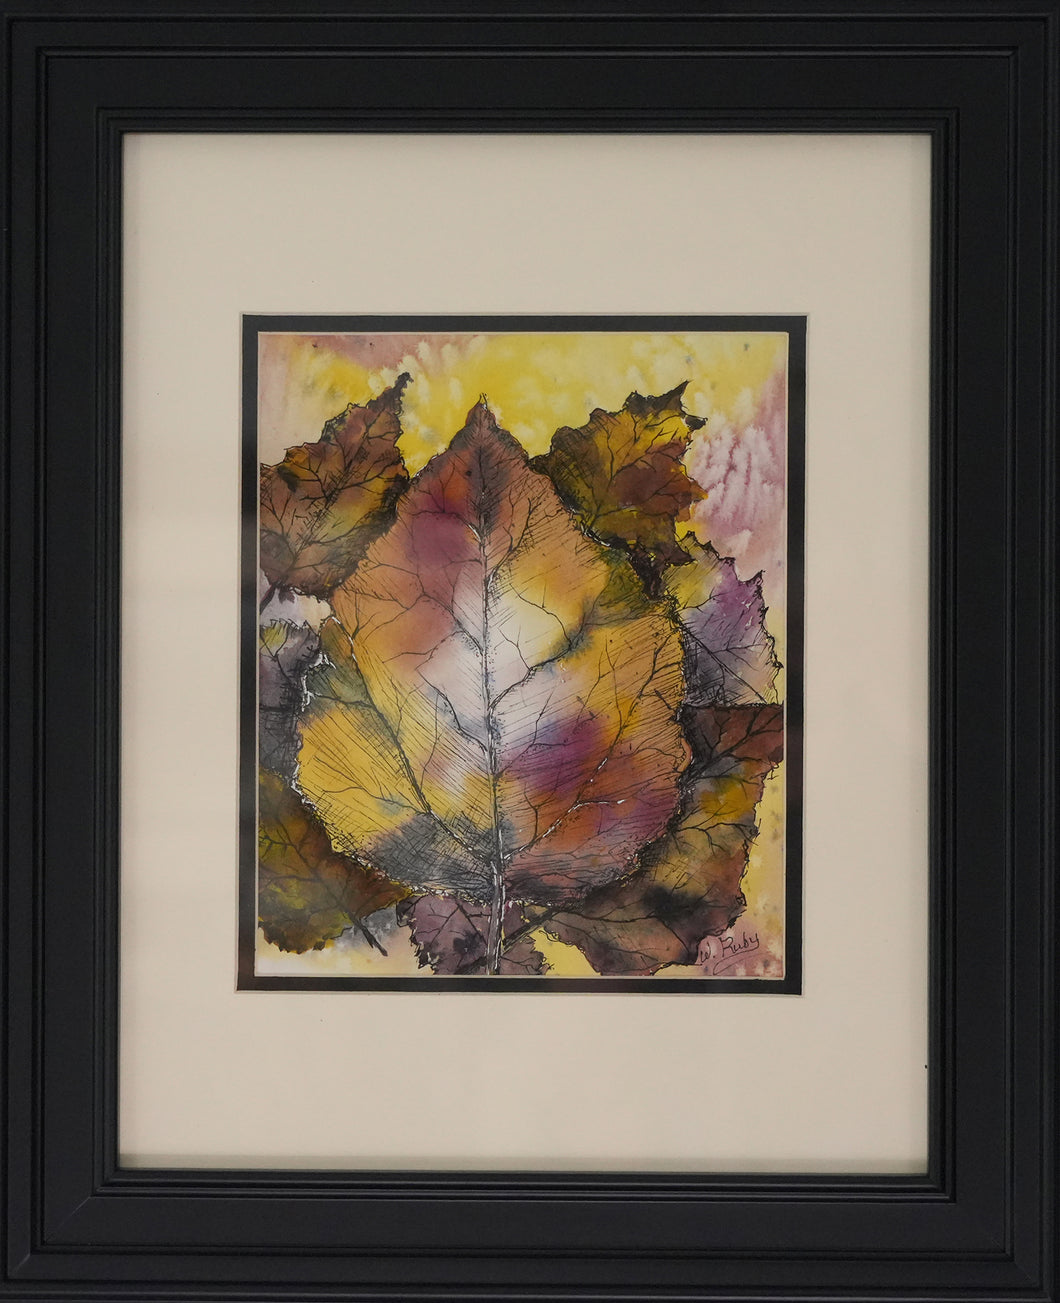 *Glowing Leaves  (14 x 17 framed size)